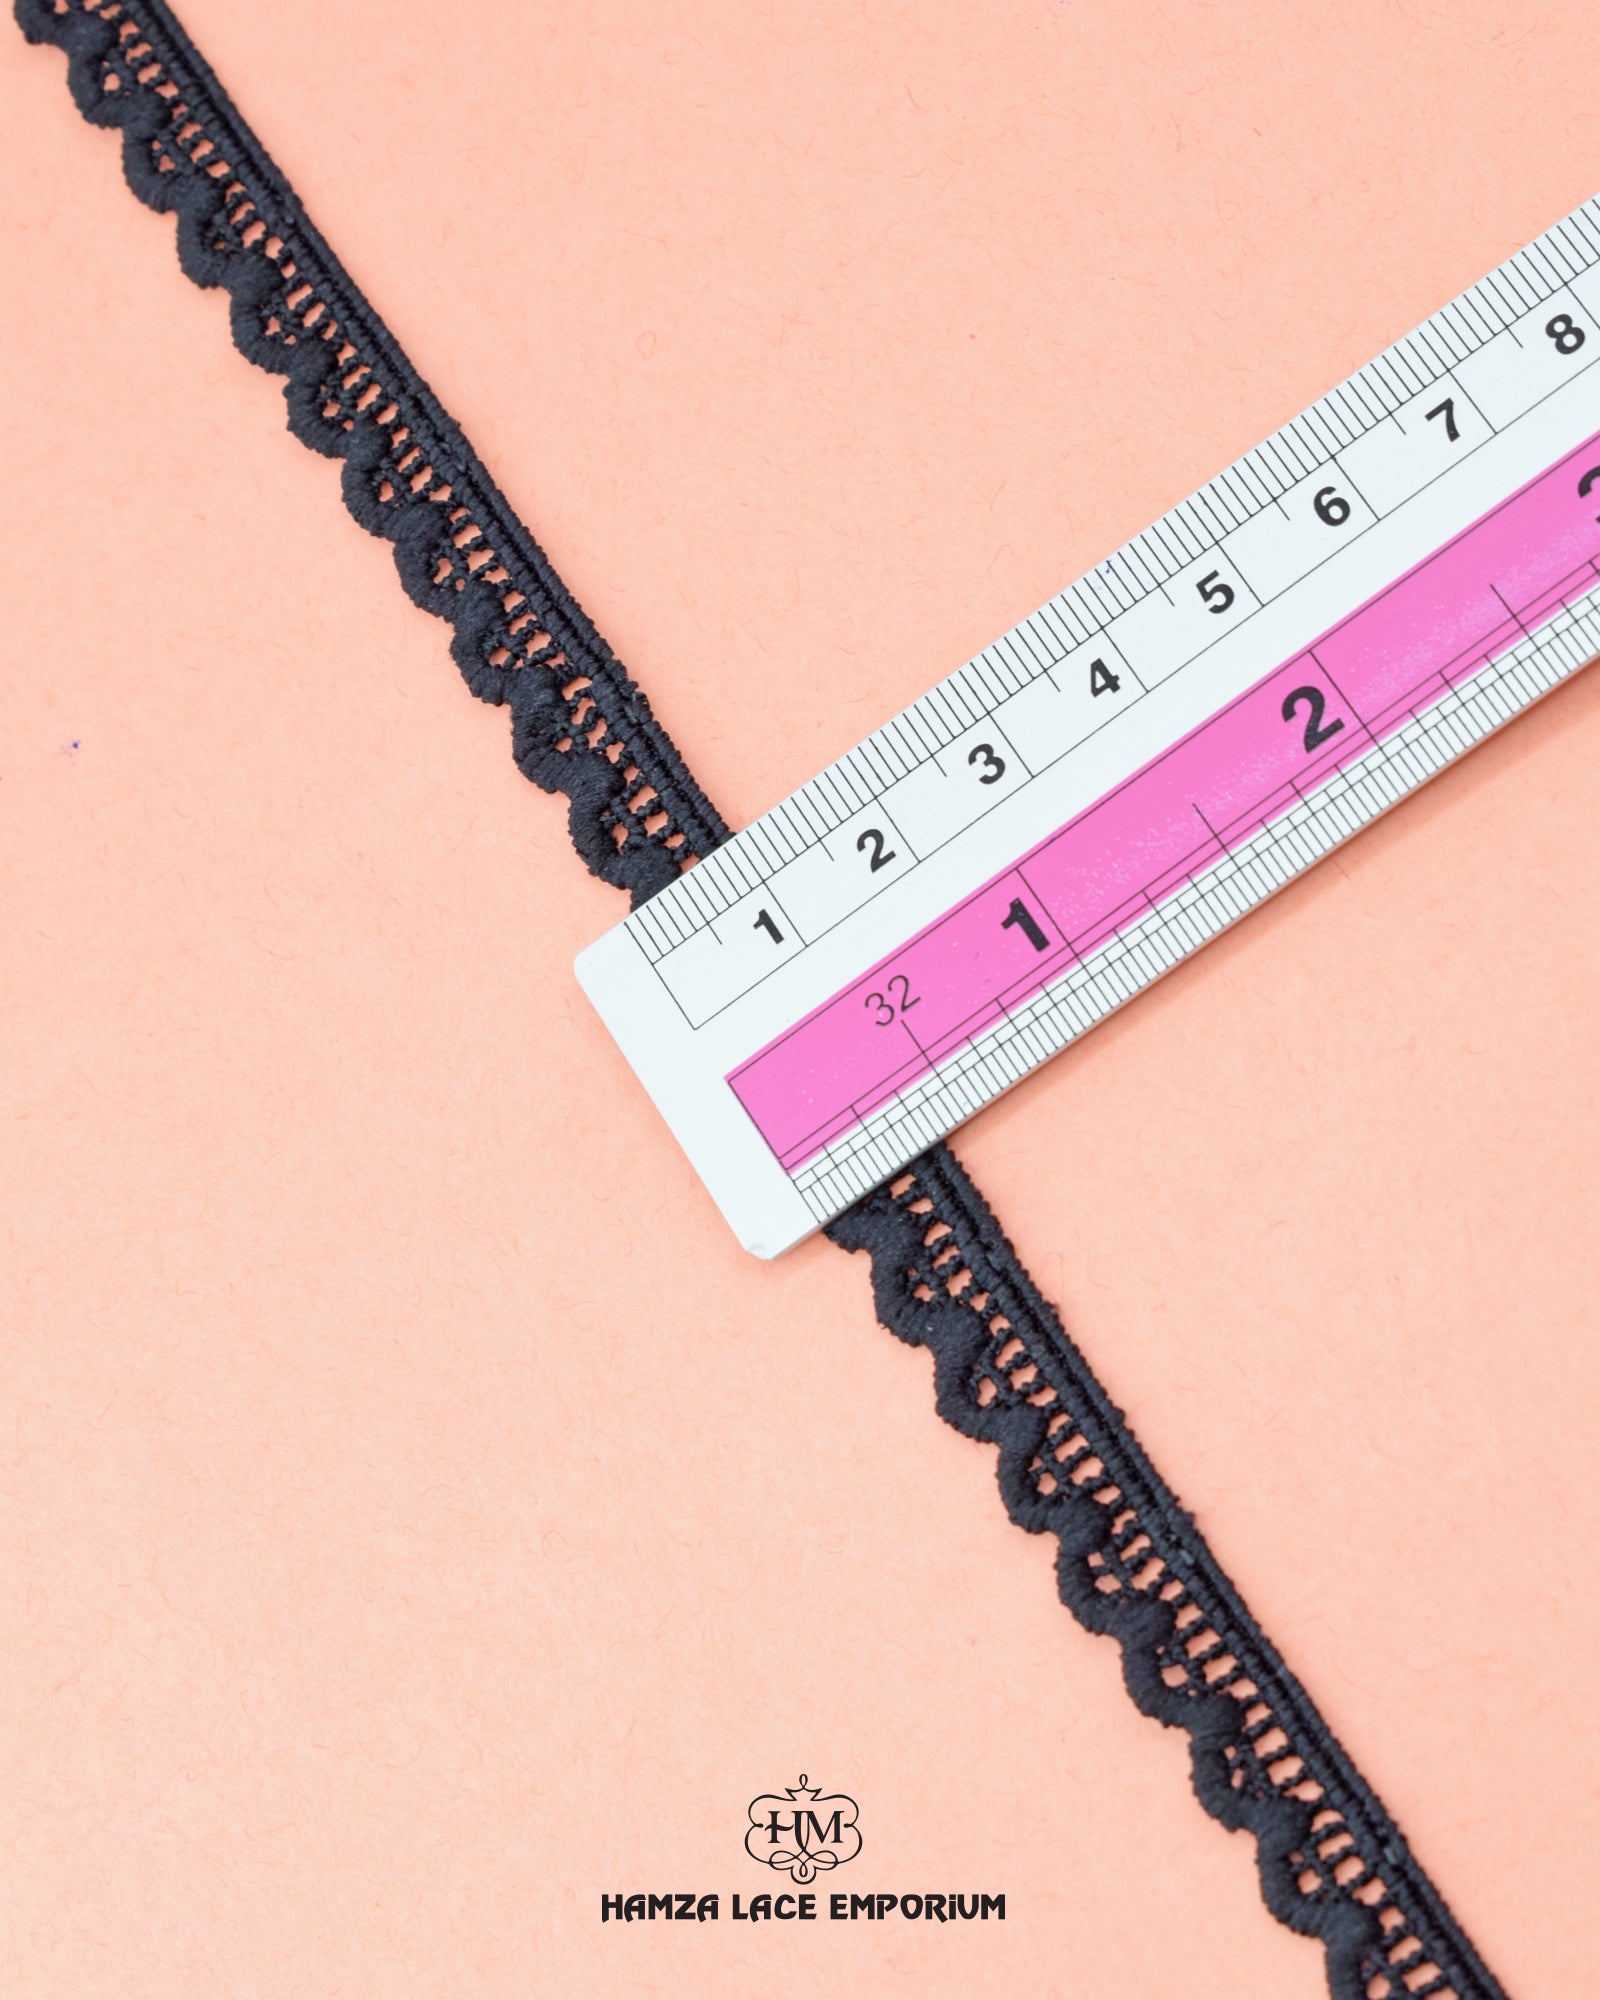 A ruler is on the 'Edging Lace 17578' measuring its size as 0.5 inches